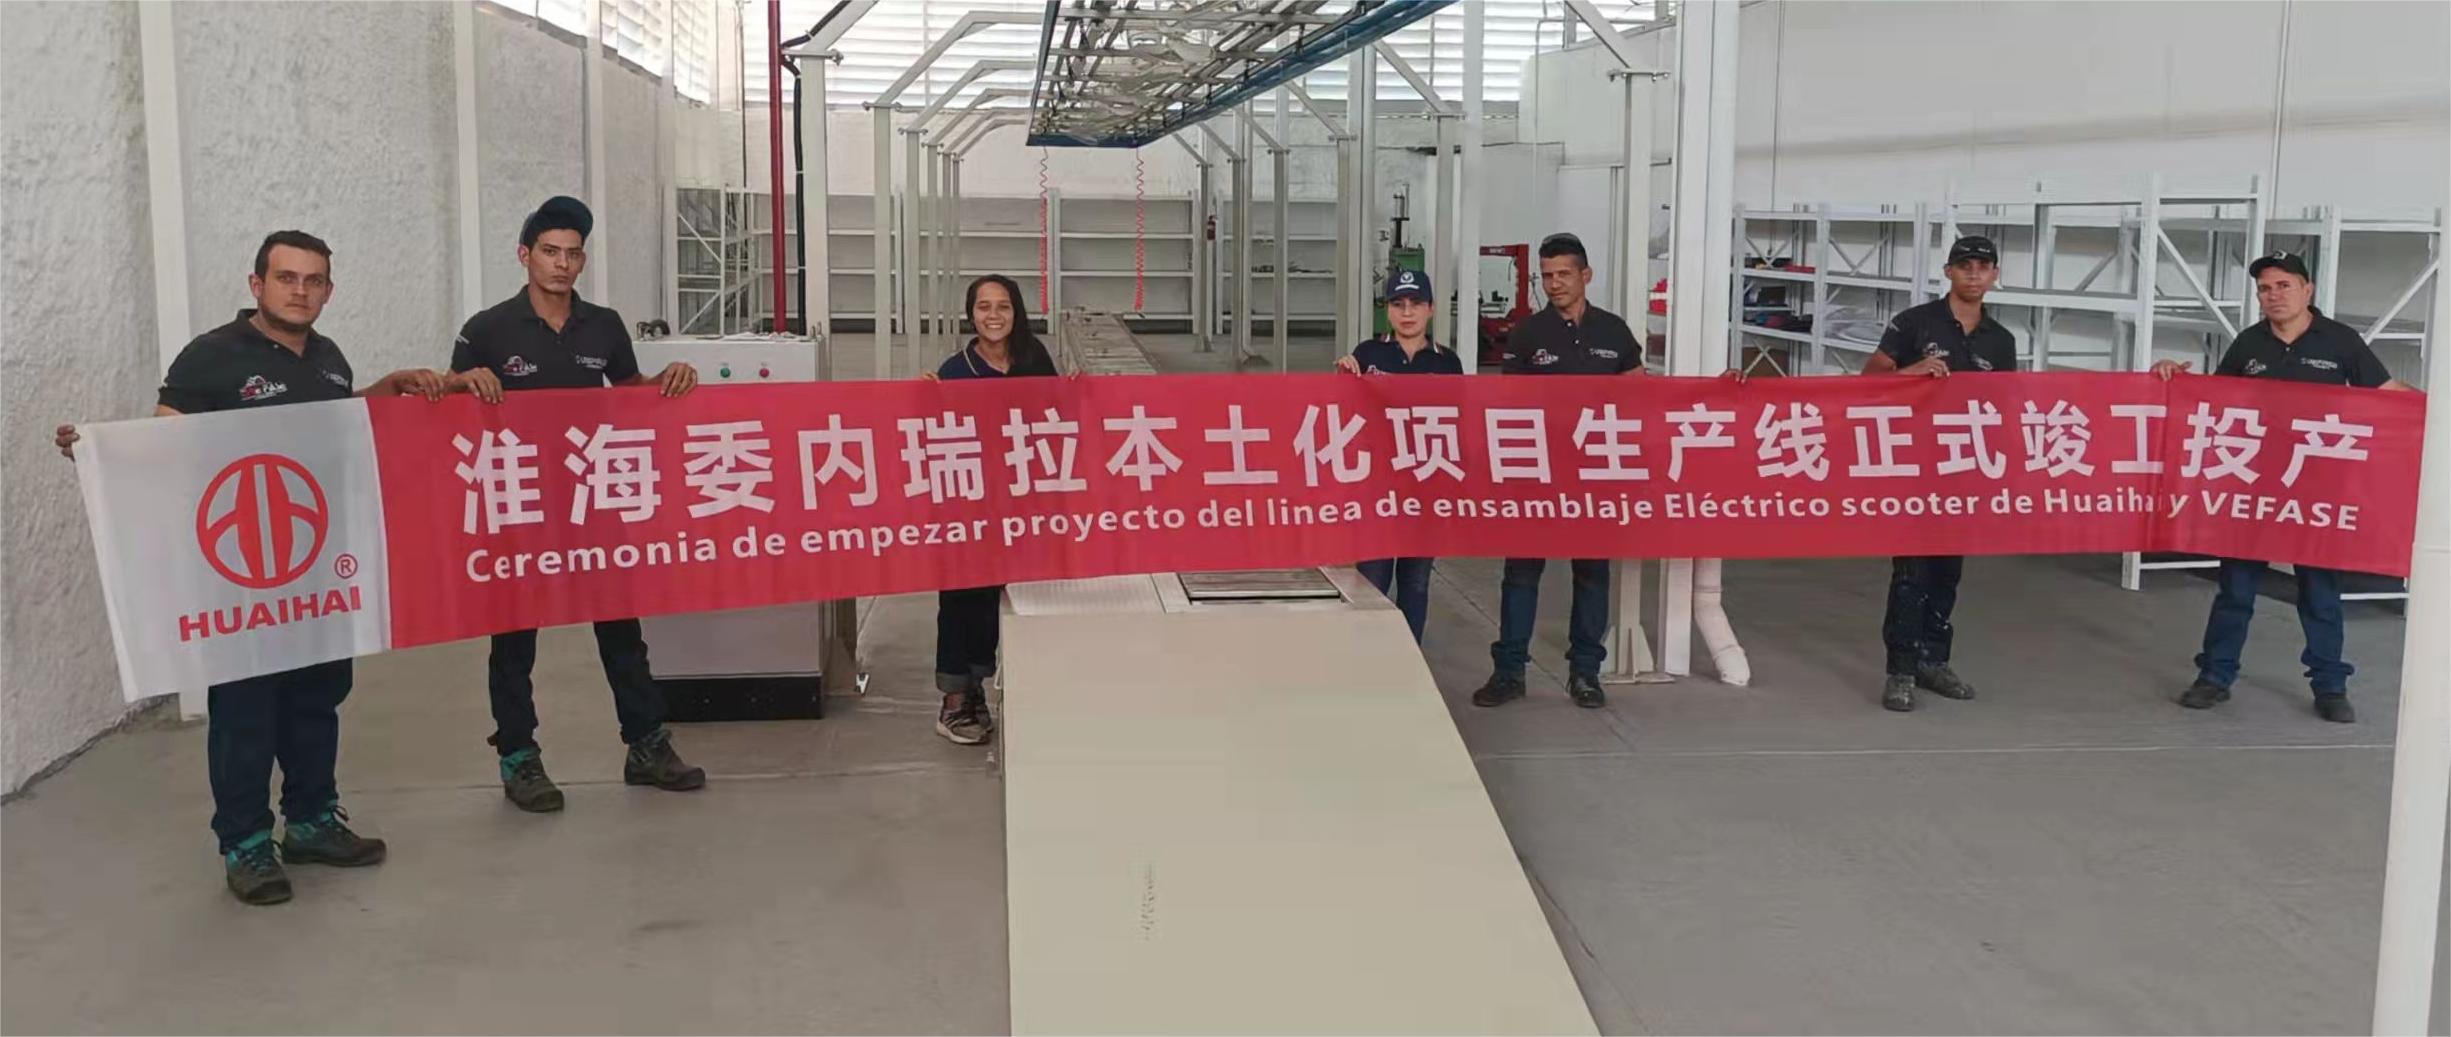 The Huaihai Electric two-wheeler Base in Venezuela has officially commenced production!